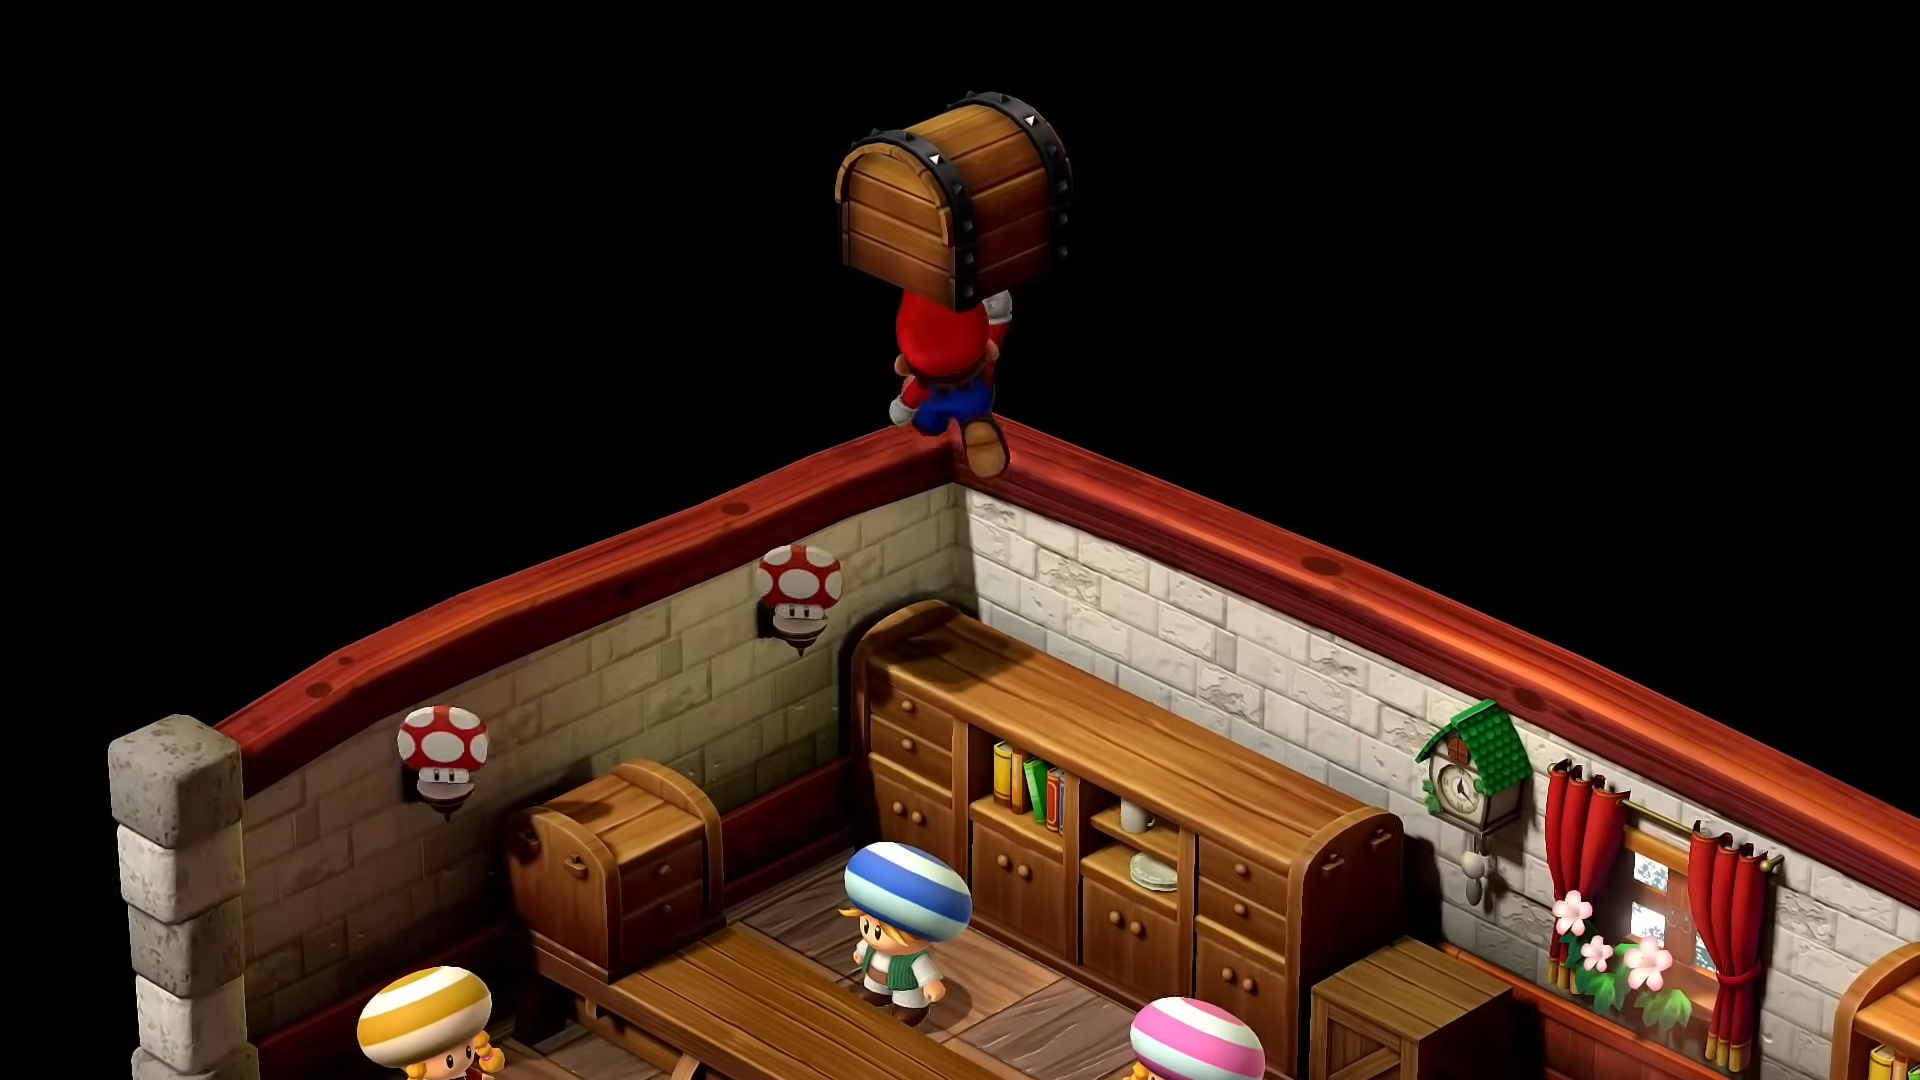 Mario jumping in a shop.